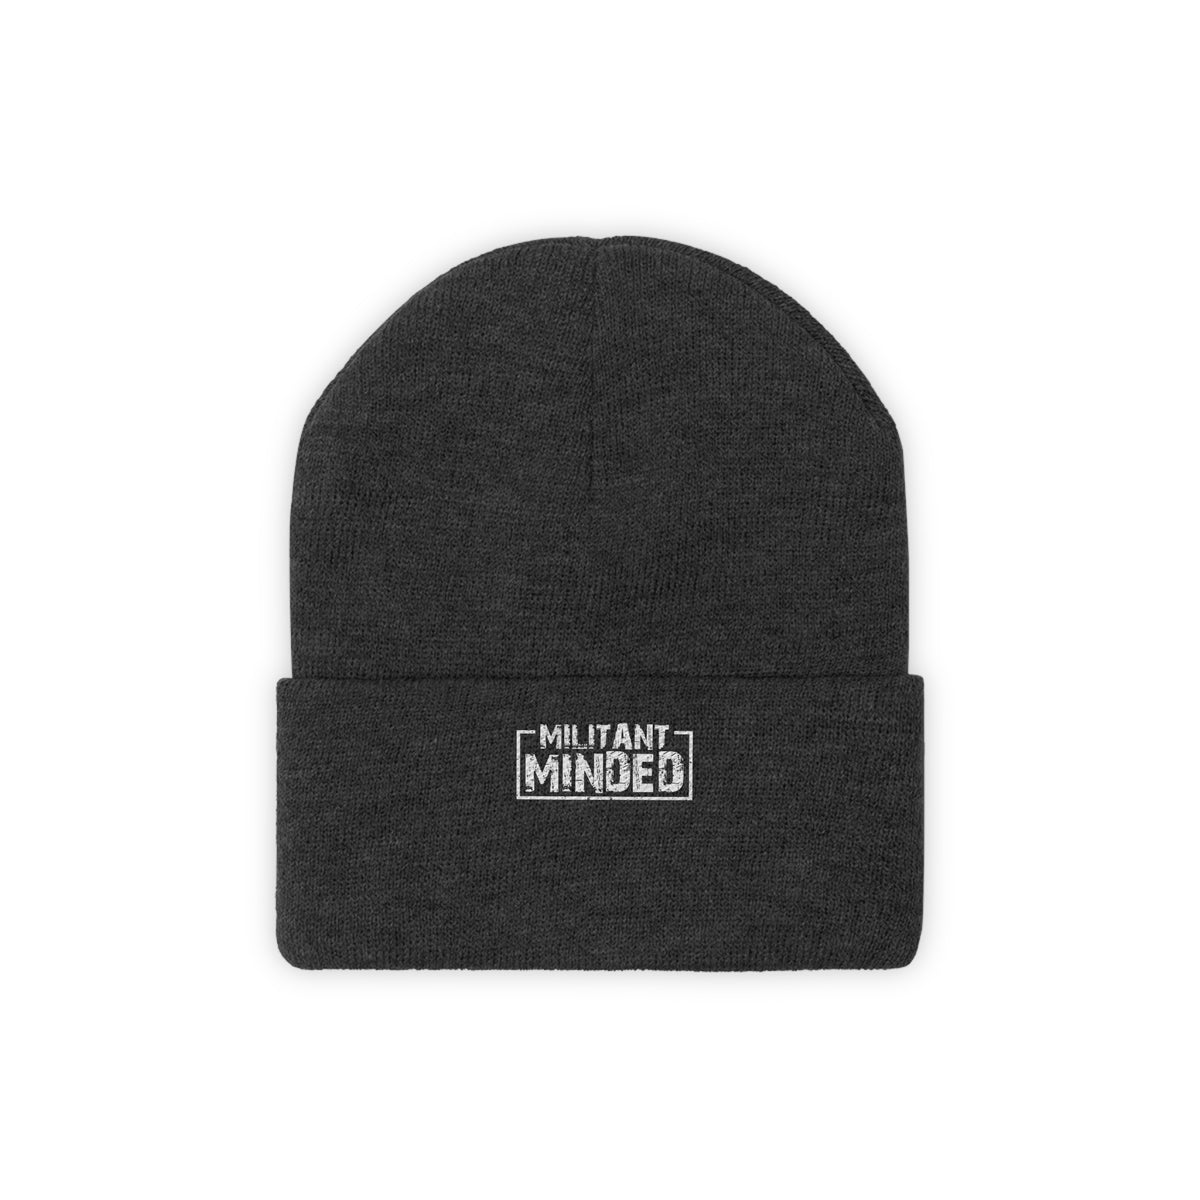 Militant Minded Knit Beanie